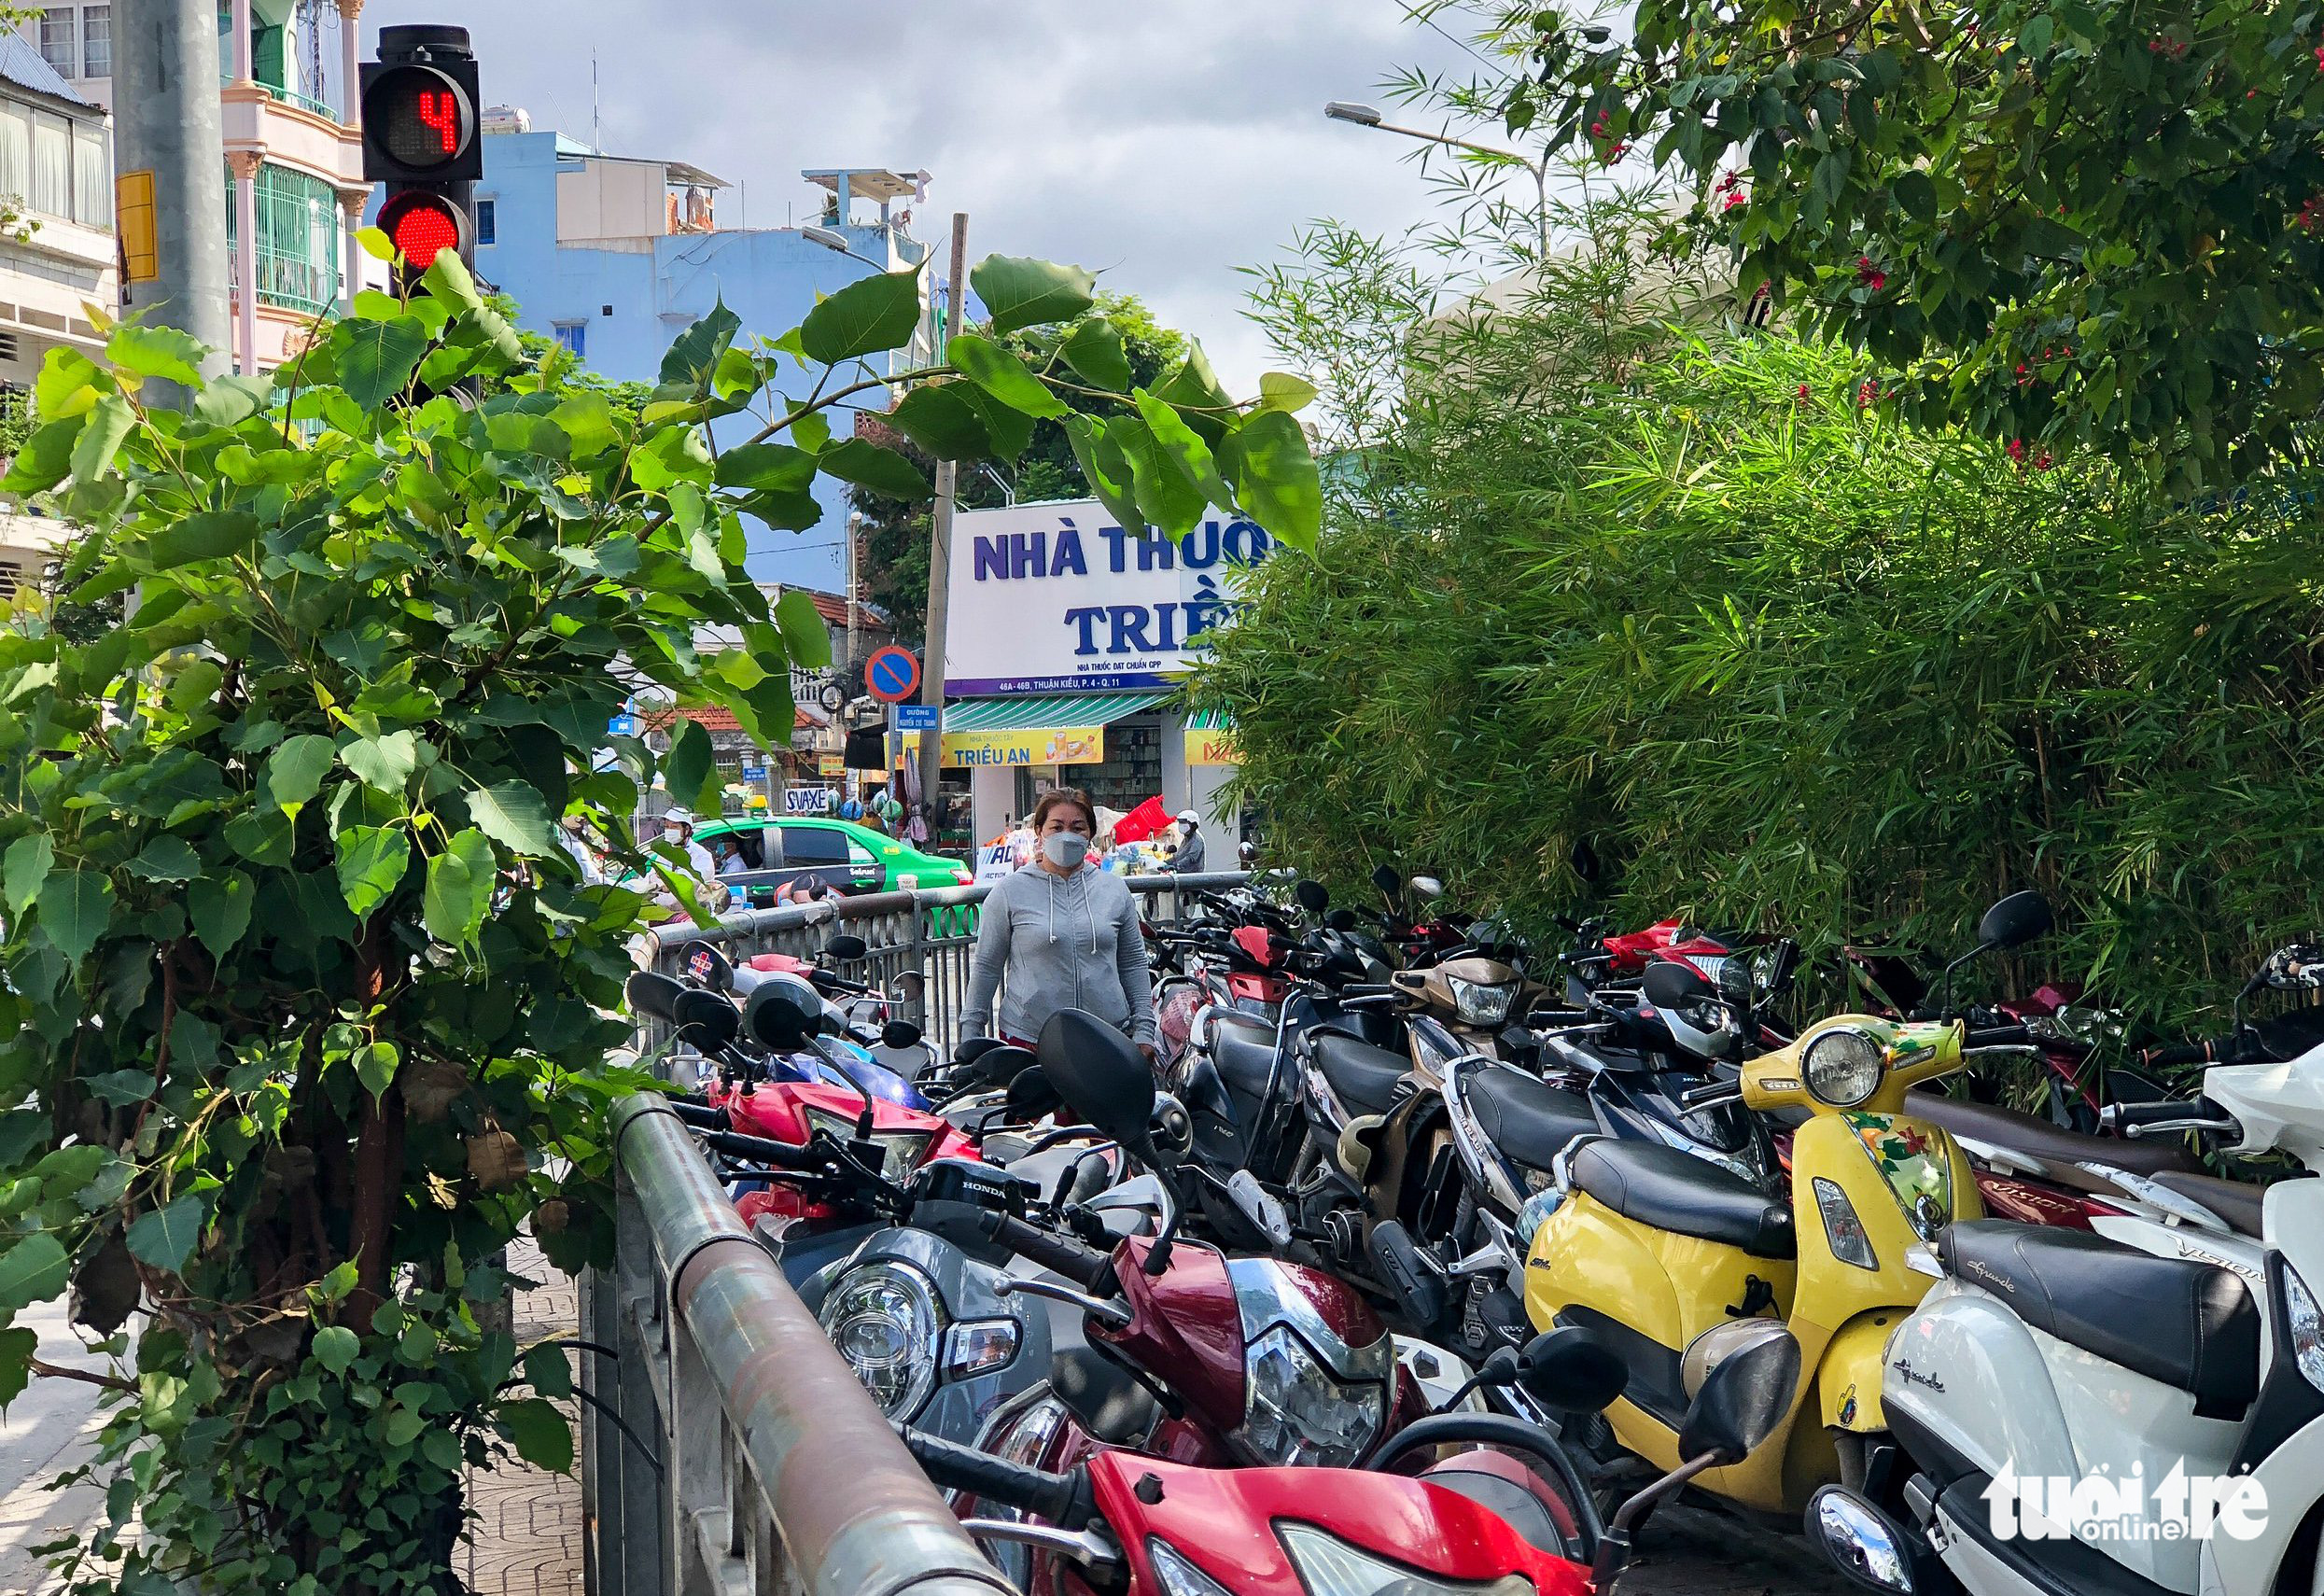 A parking lot is fenced off on the sidewalk at the corner of Nguyen Chi Thanh and Thuan Kieu Streets near Cho Ray Hospital in District 5, Ho Chi Minh City, May 18, 2022. Photo: Chau Tuan / Tuoi Tre